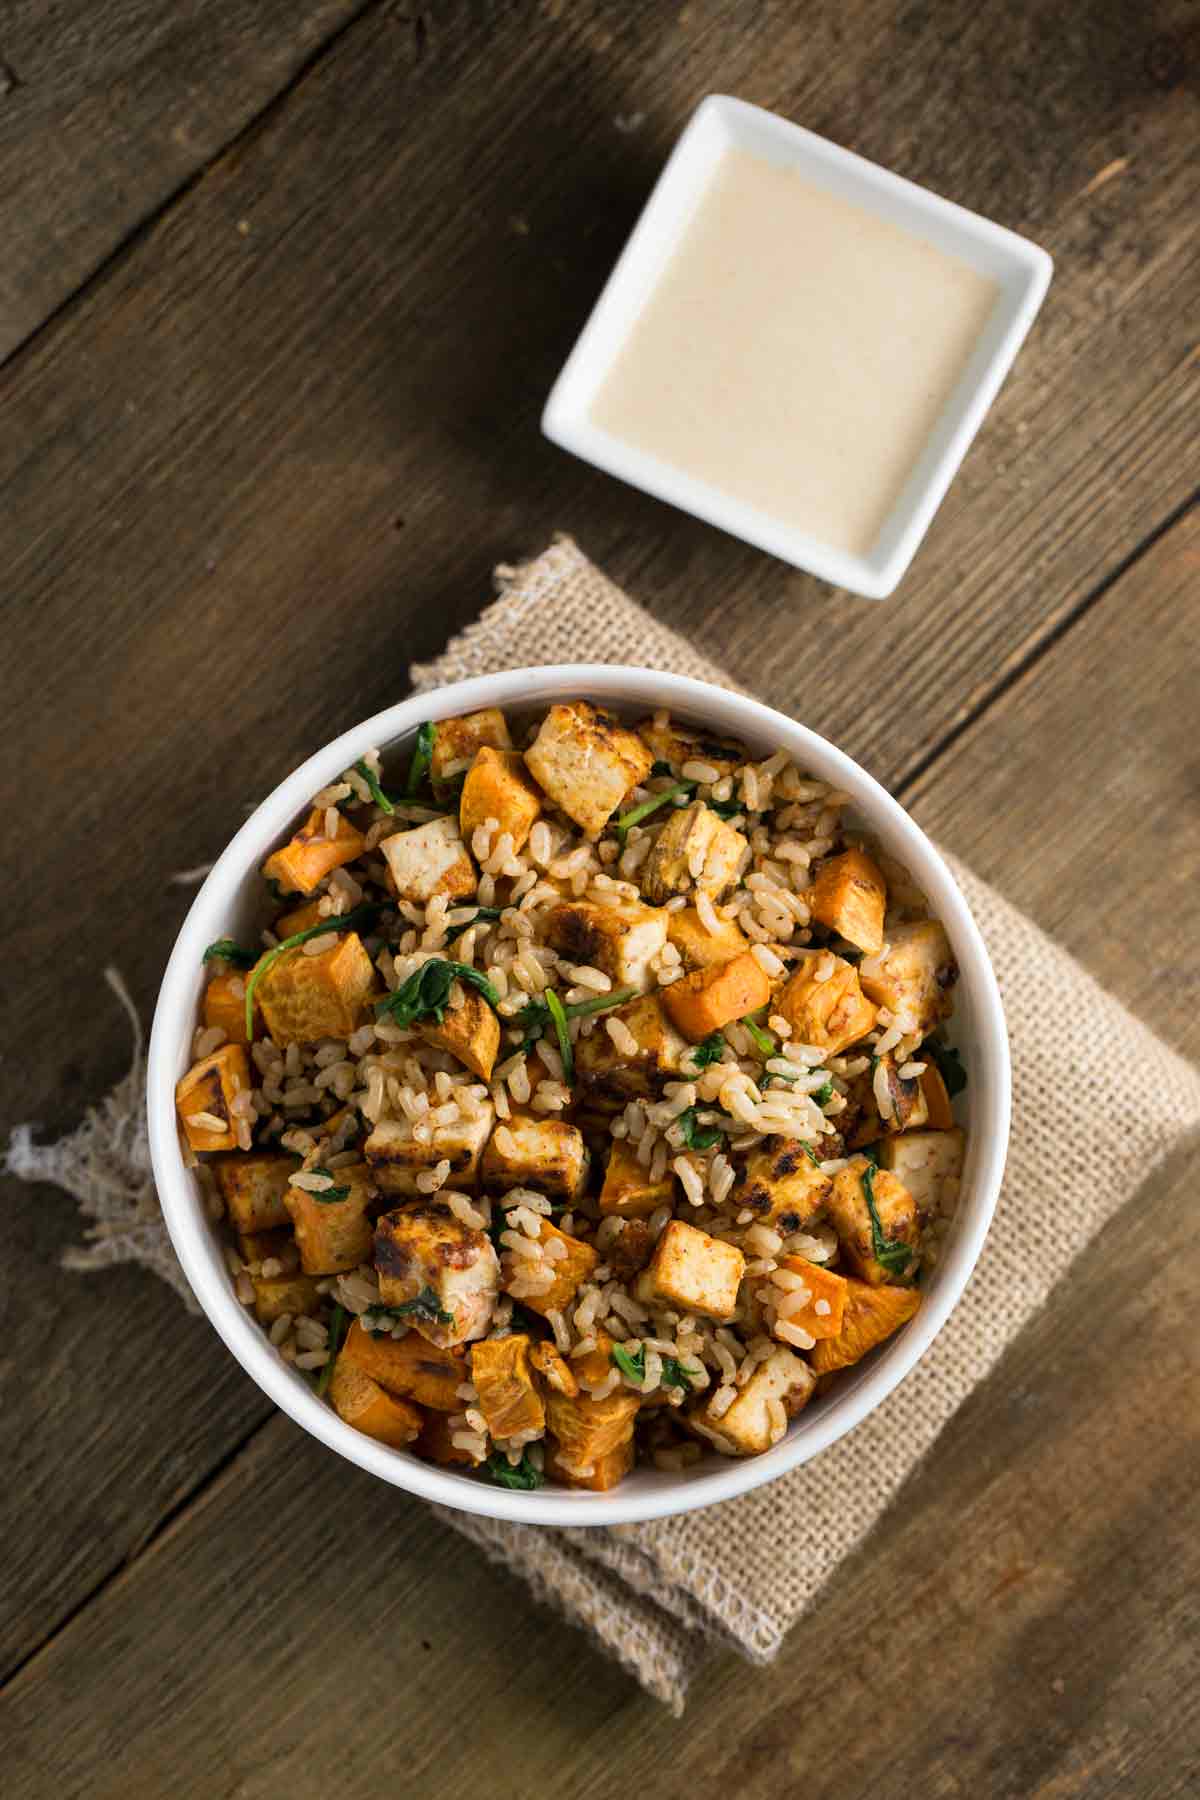 Overhead view of a bowl of tofu sweet potato rice bowl with greens.